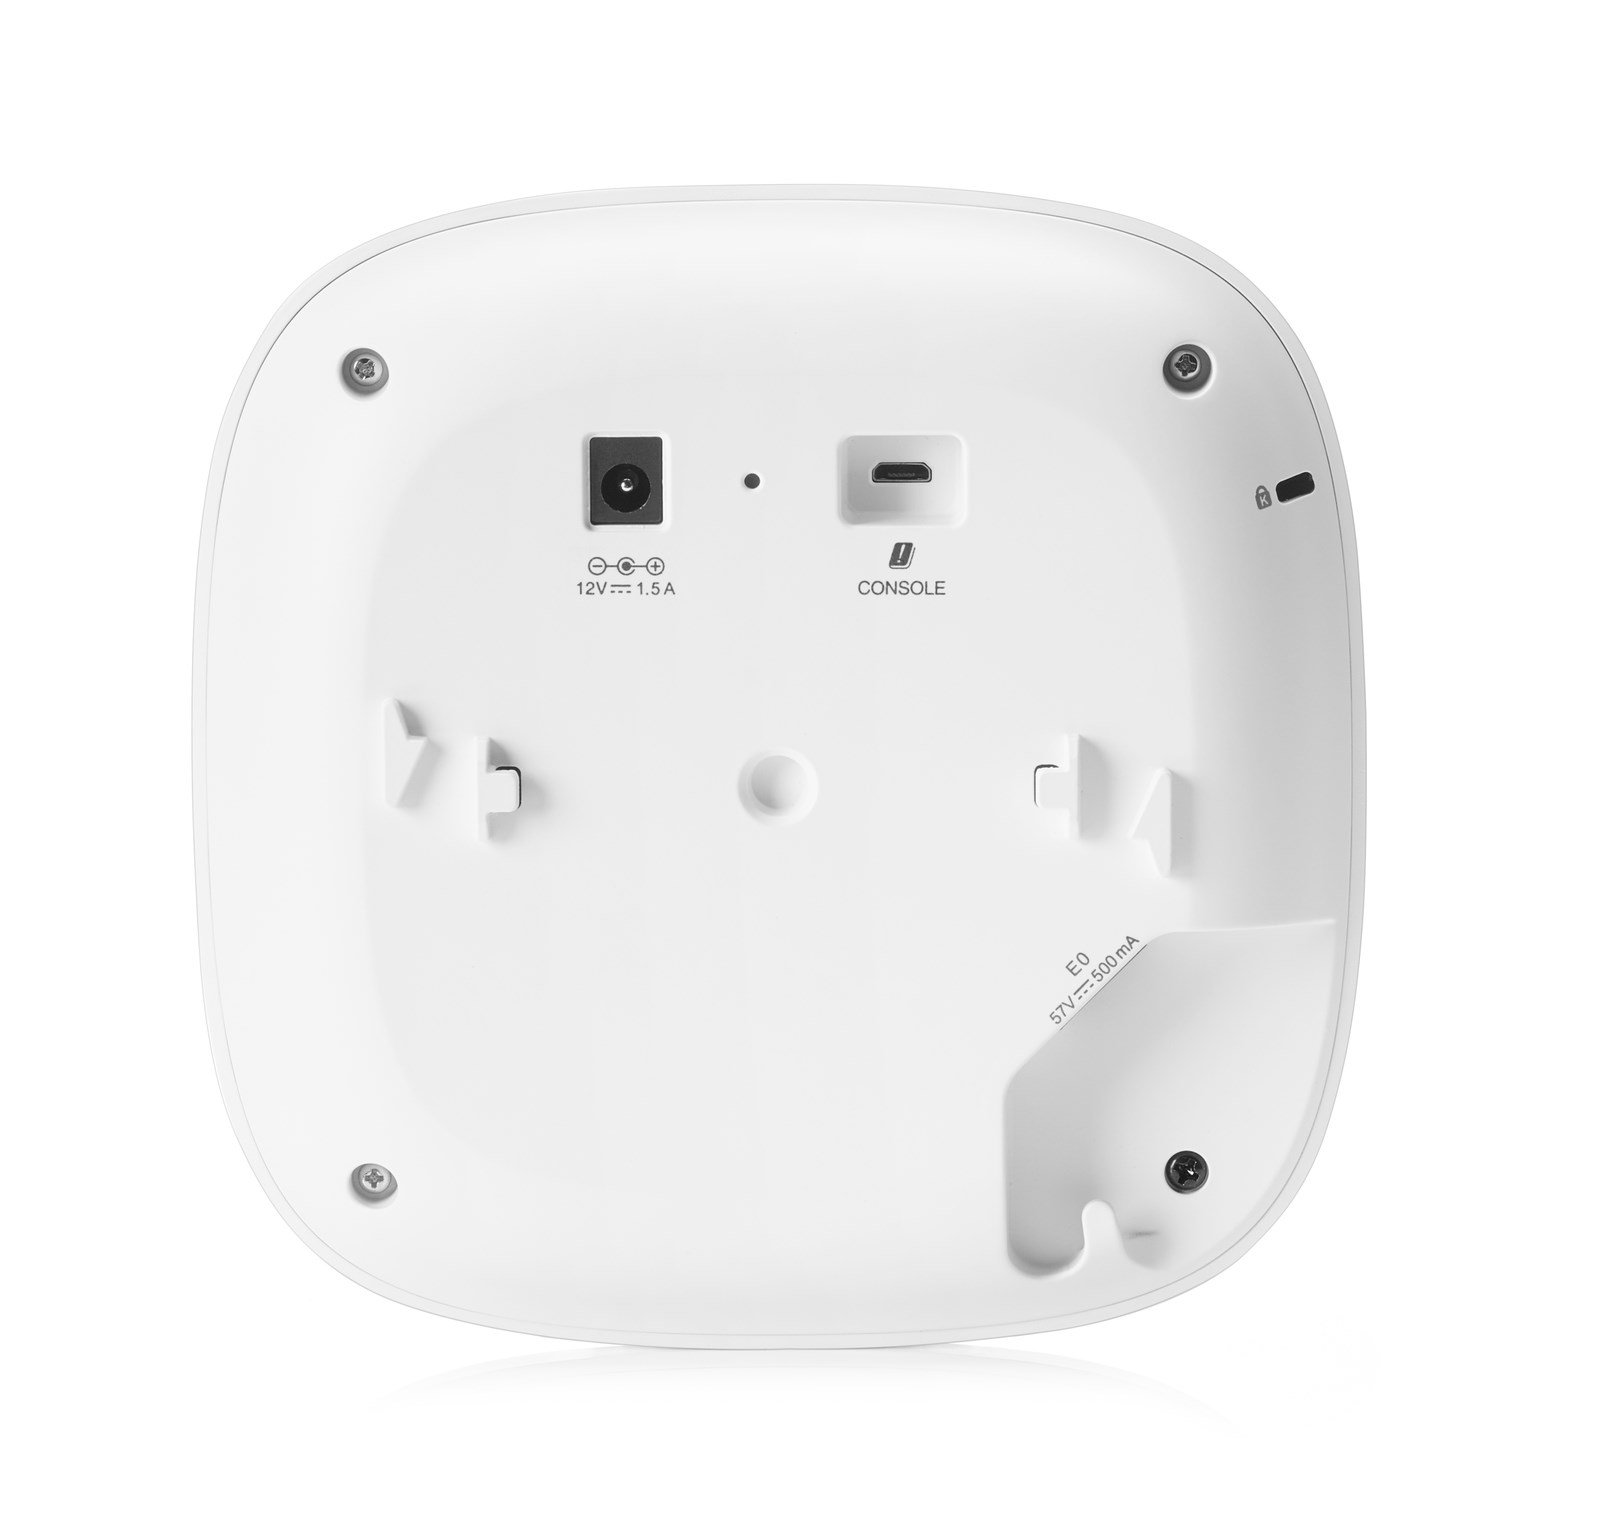 5 x Aruba Instant On AP25 (RW) 4x4 Wi-Fi 6 Indoor Access Point  ( 5 pack )2 